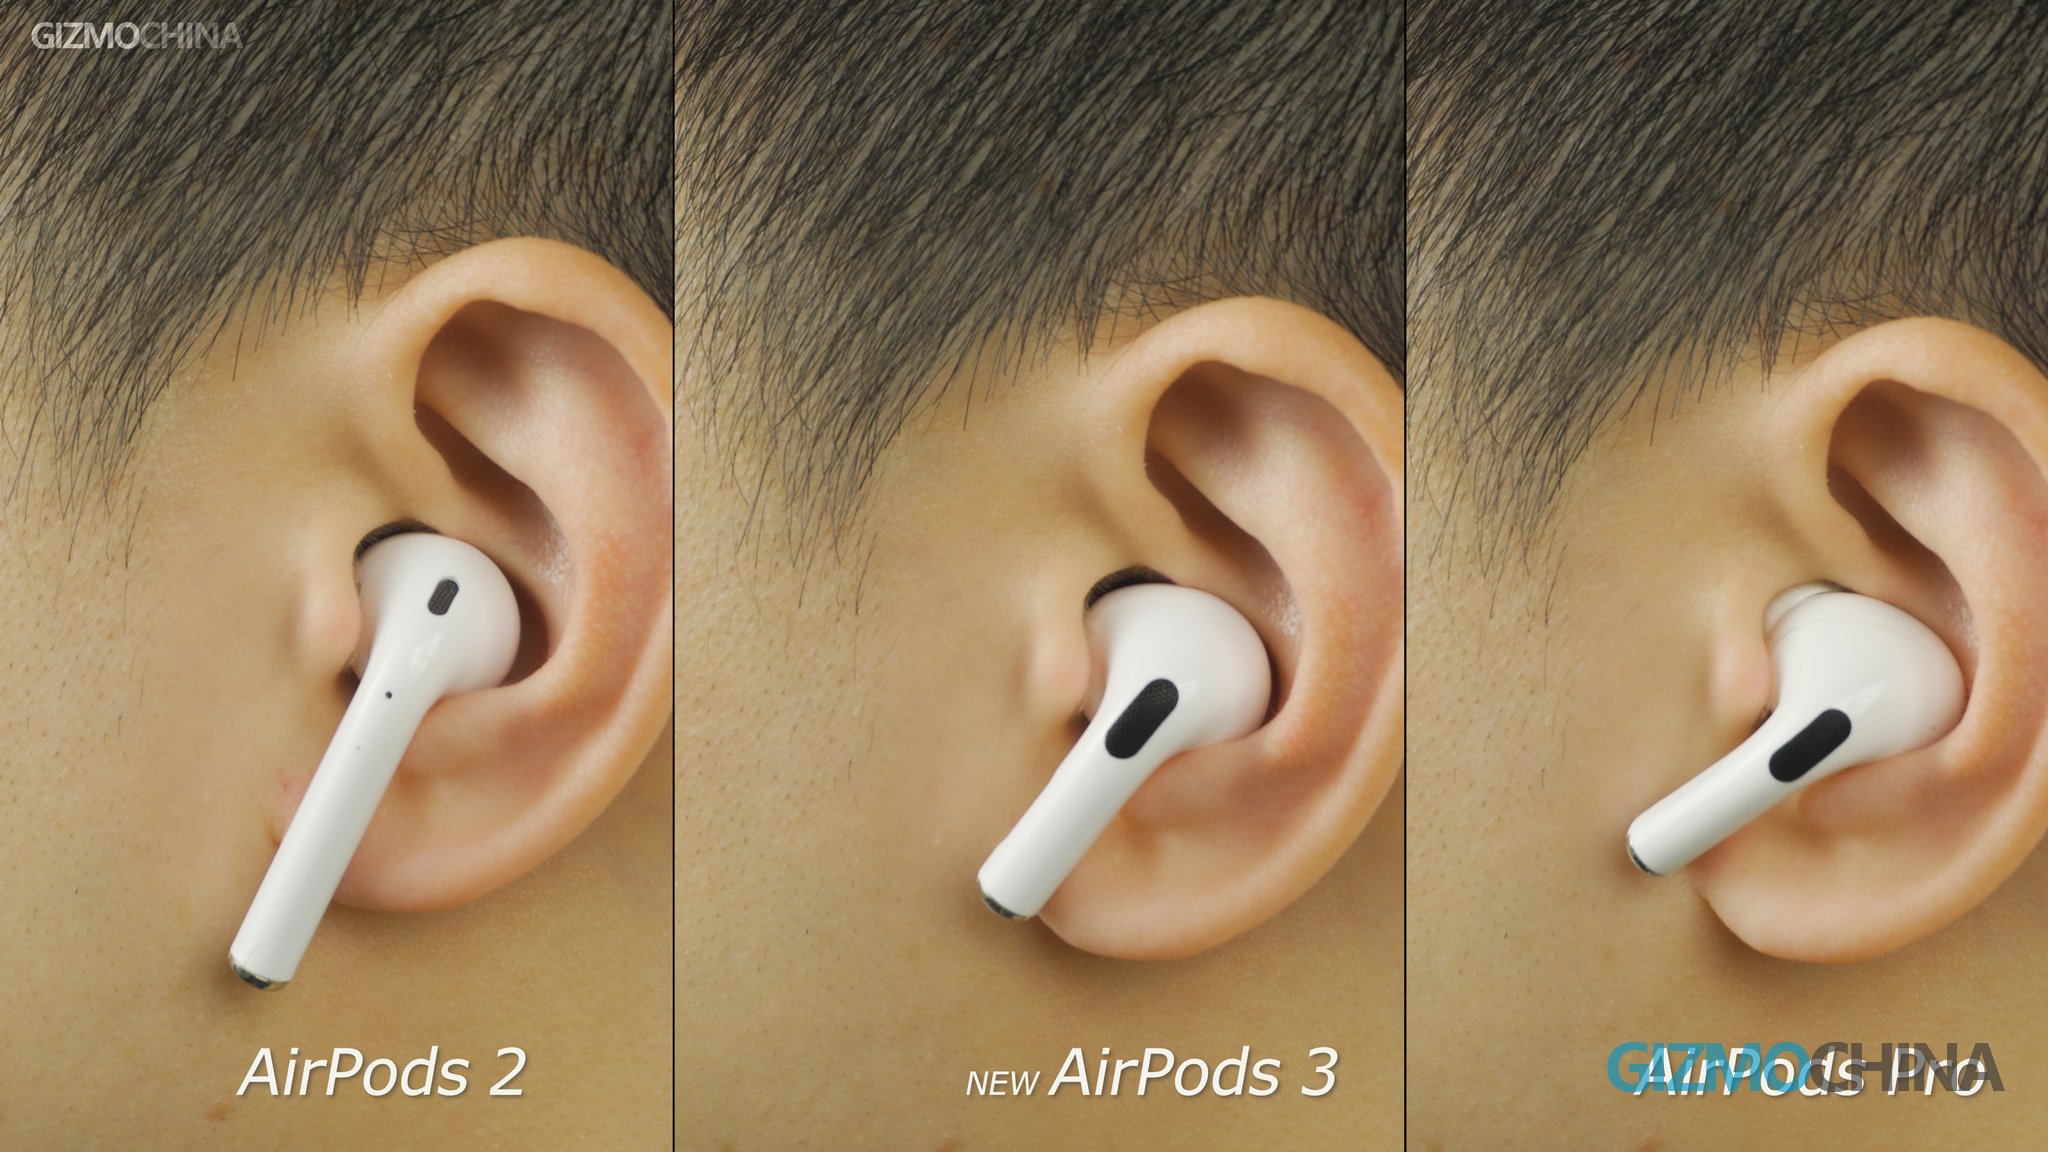 Apple AirPods 3 ဒီဇိုင်းနှင့် Airpods Pro vs Airpods